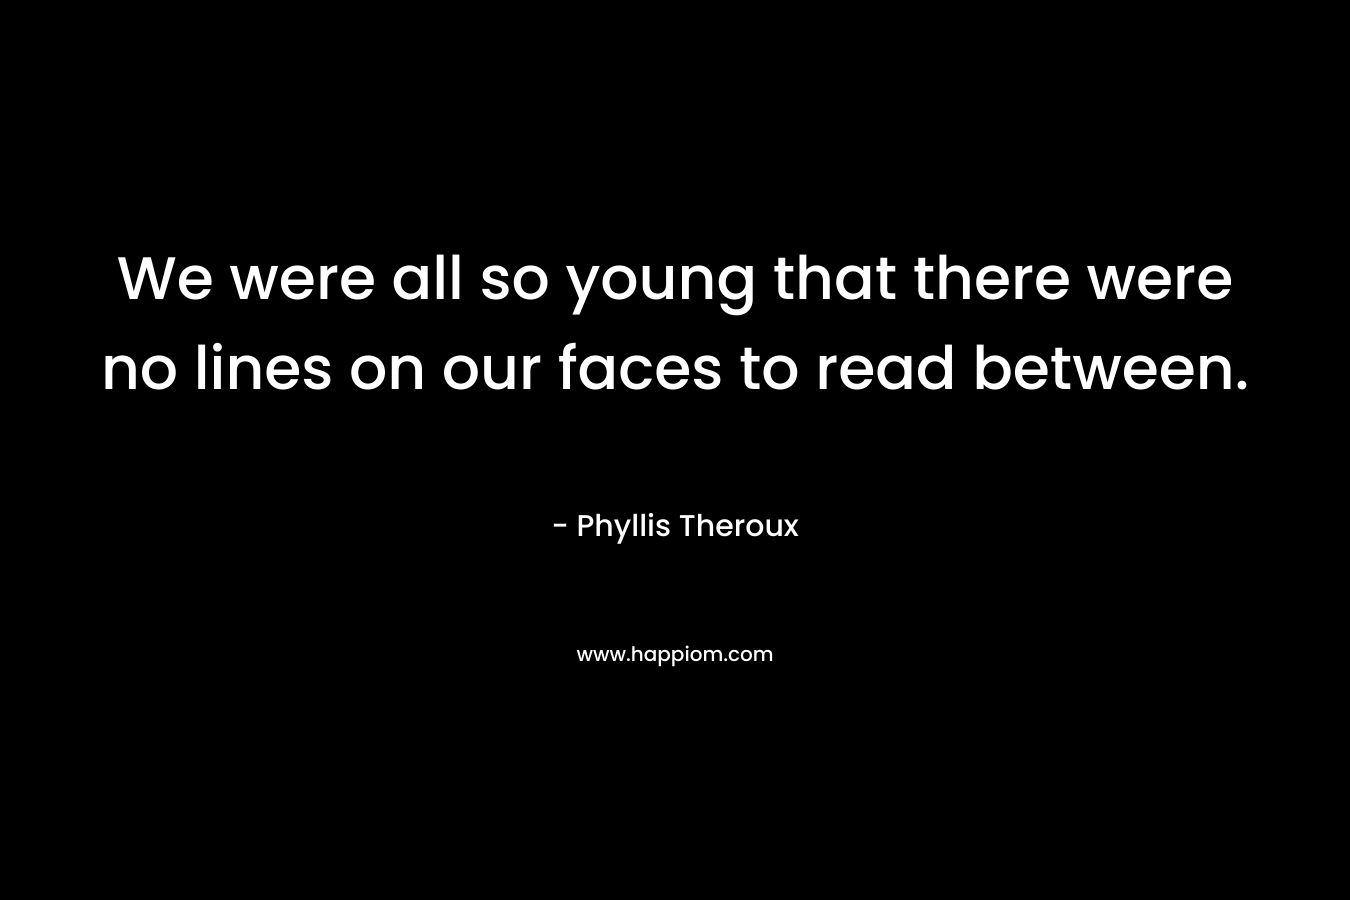 We were all so young that there were no lines on our faces to read between. – Phyllis Theroux